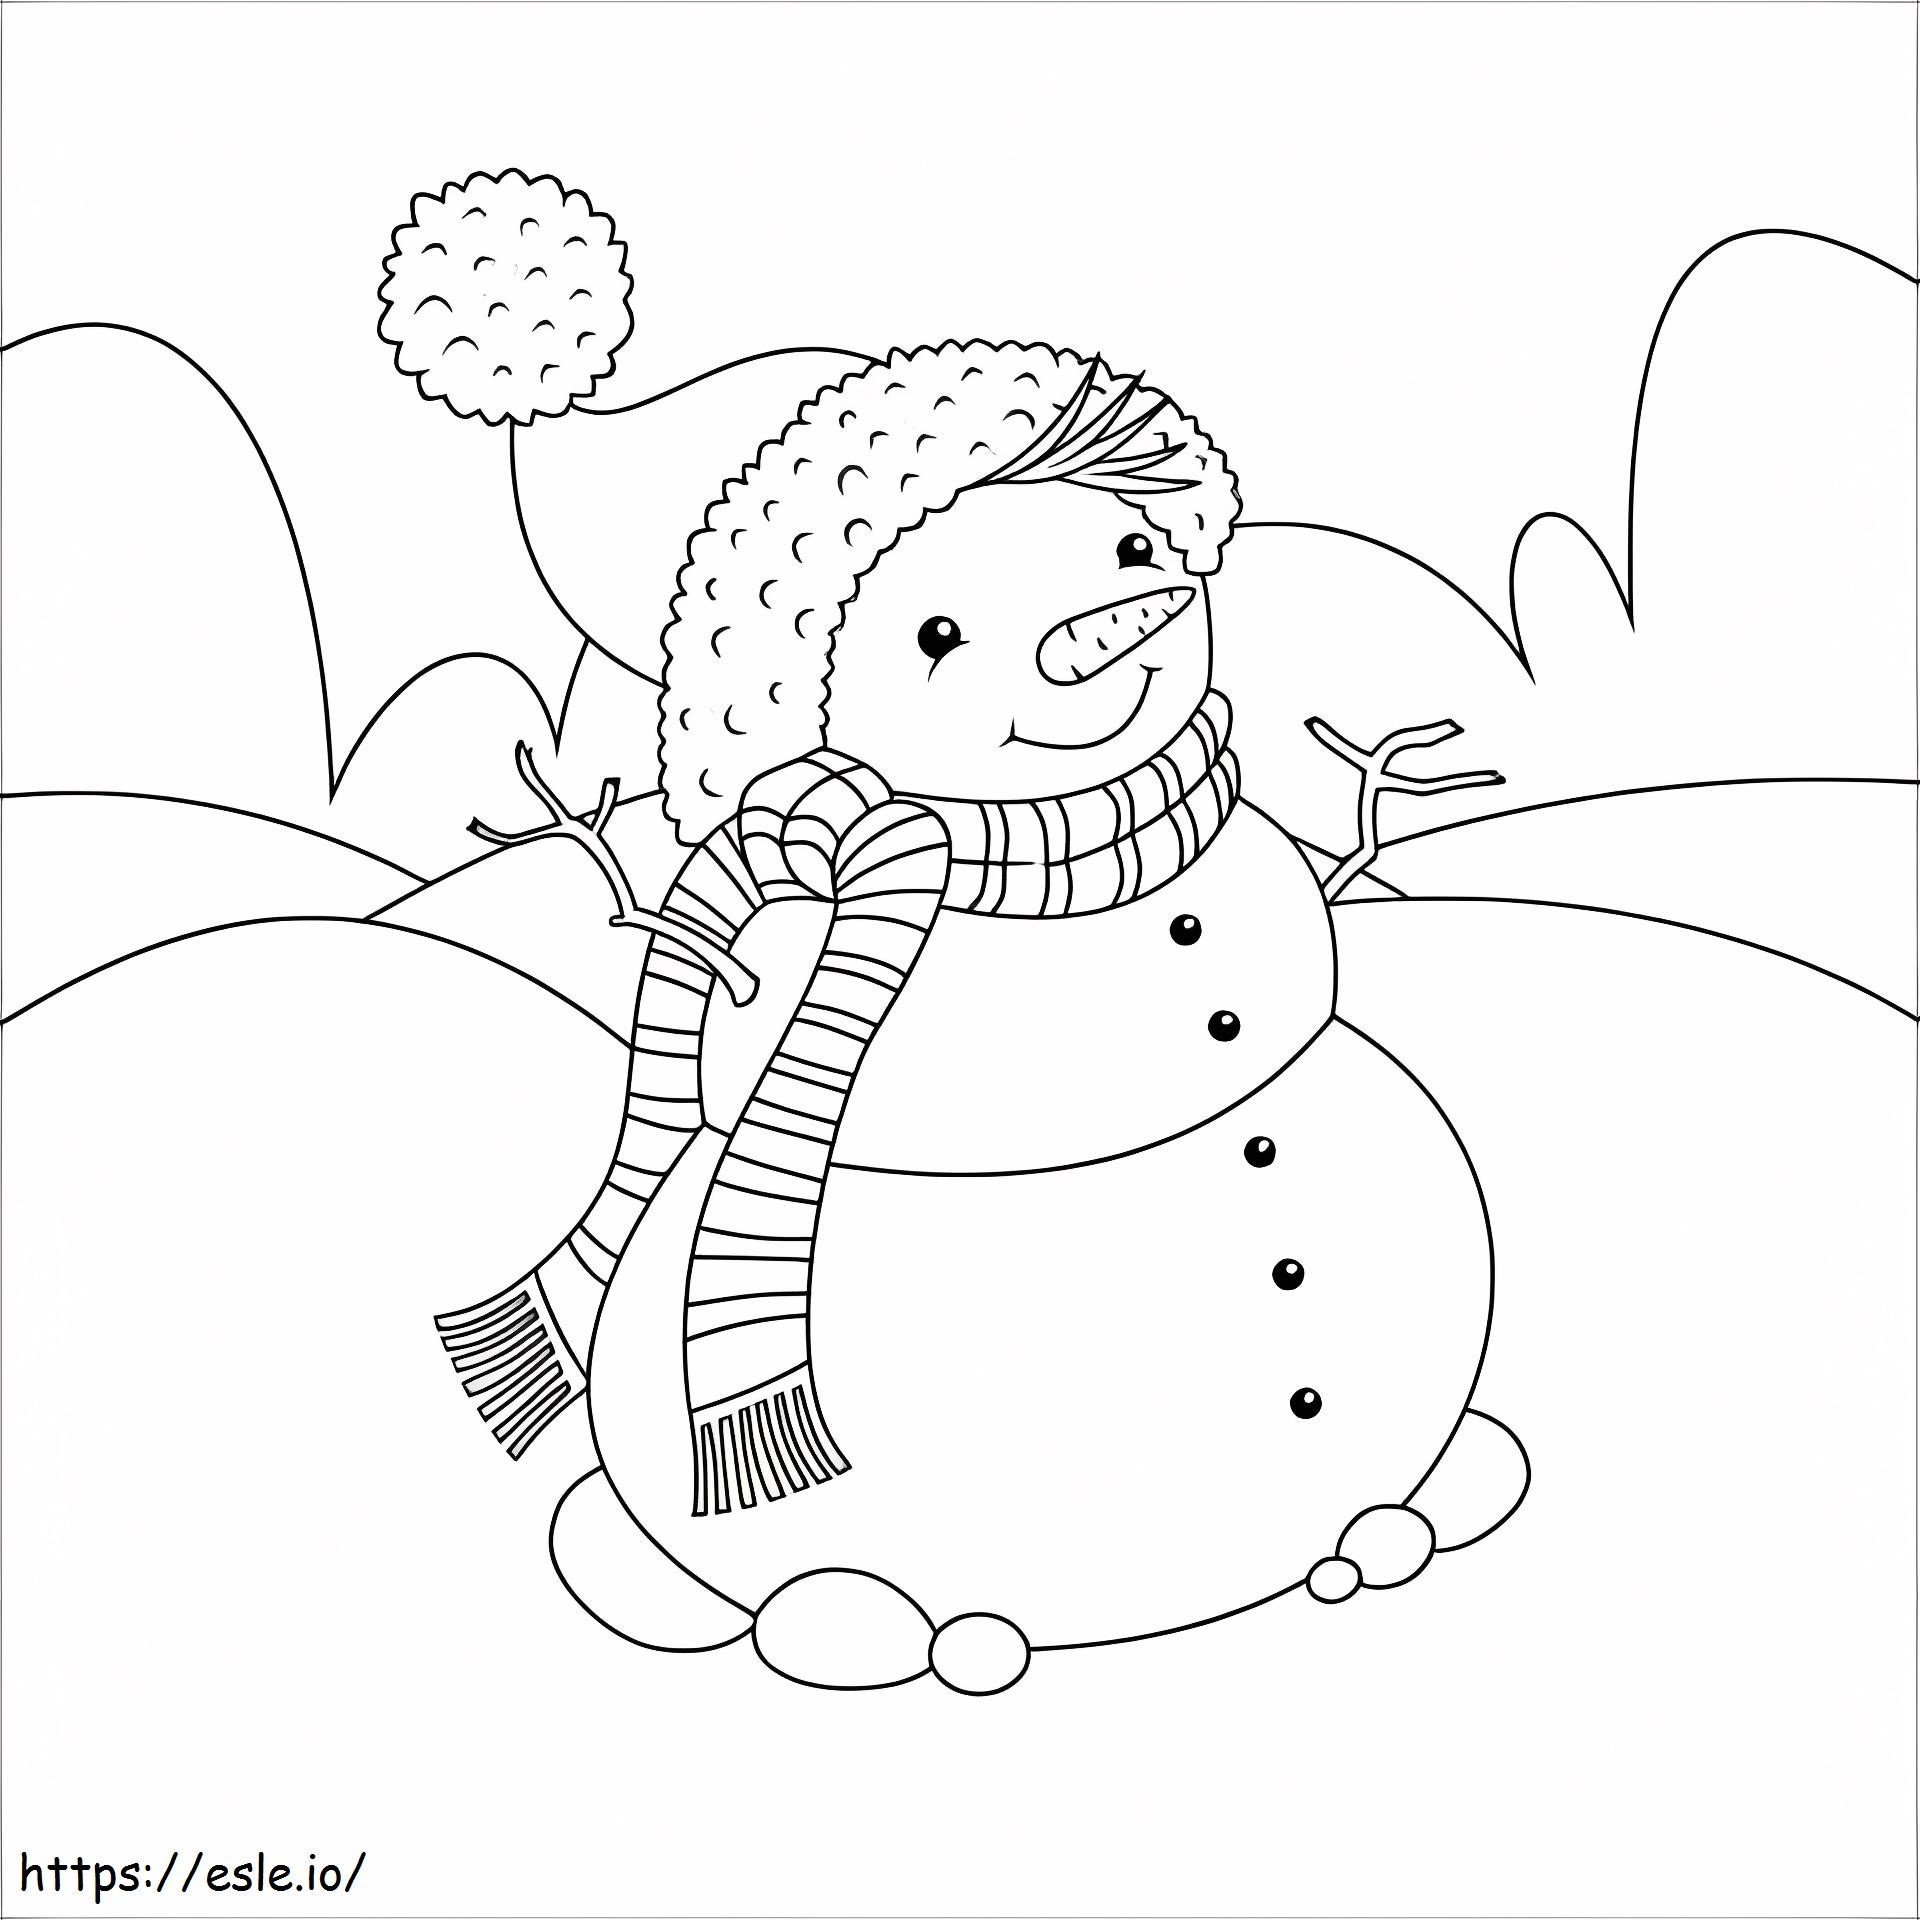 Basic Snowman coloring page